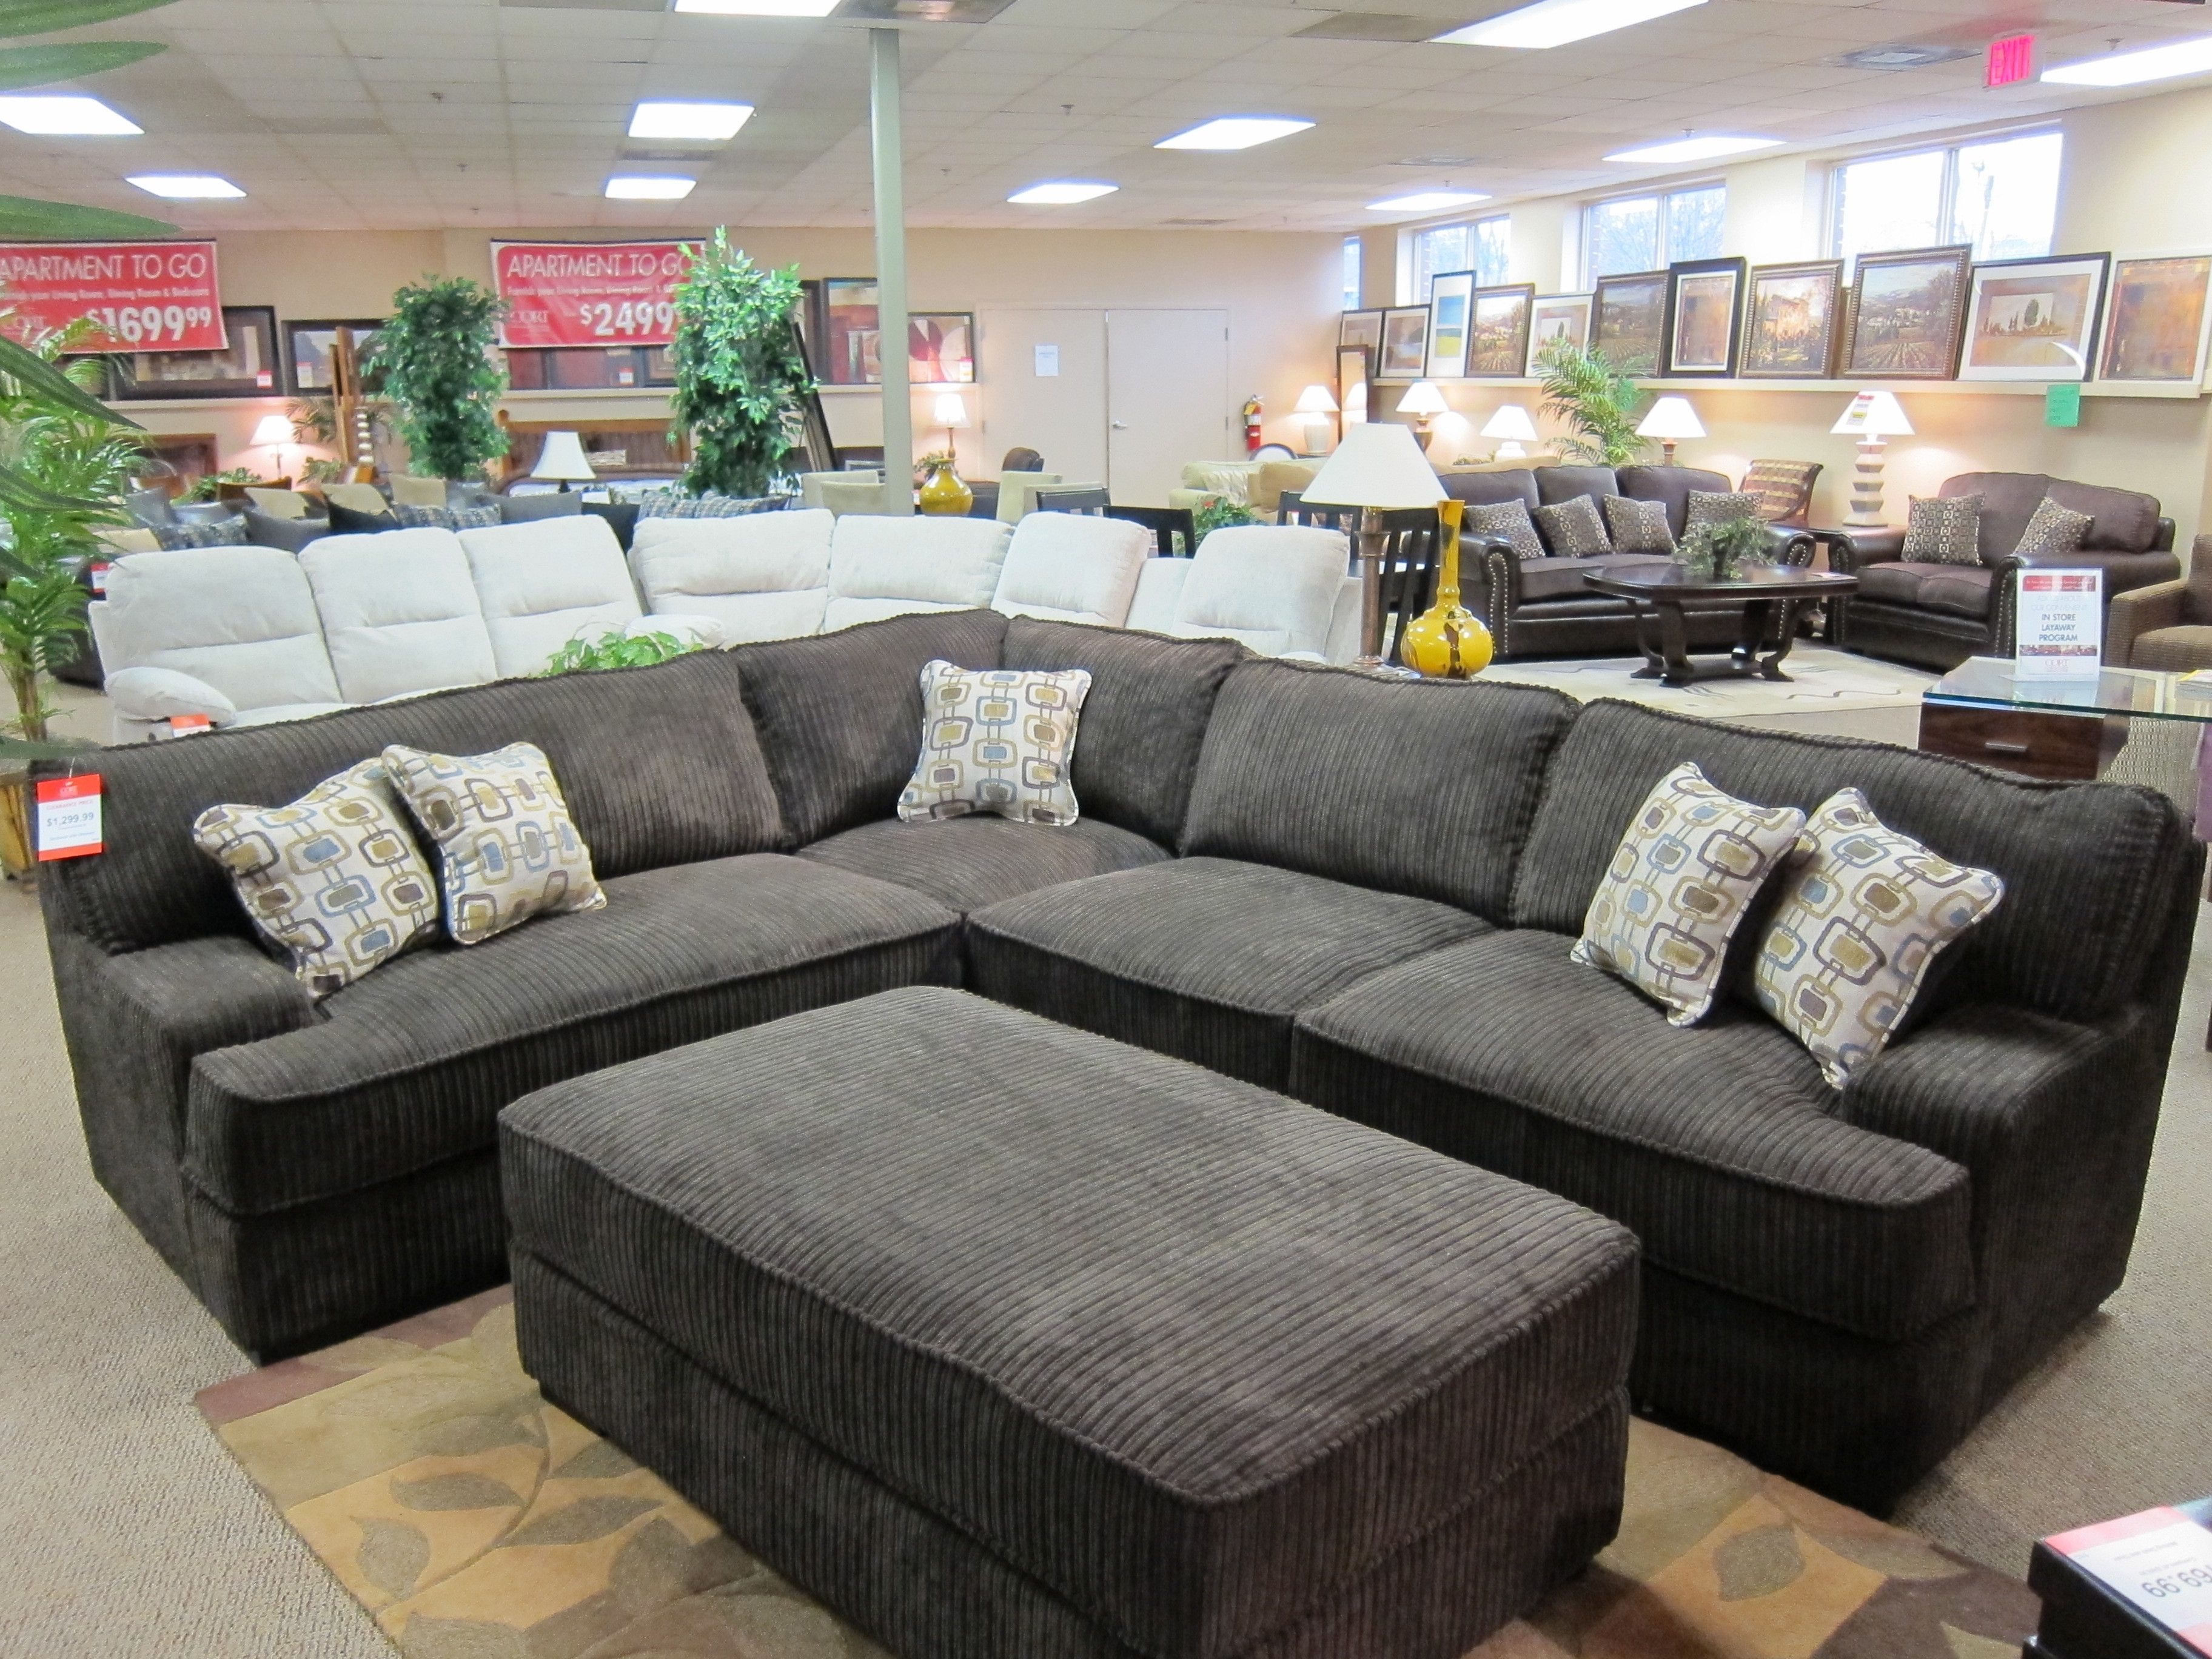 High Tech Wayfair Sectionals Sofas Oversized That Are Ready For For Sectional Sofas With Oversized Ottoman 